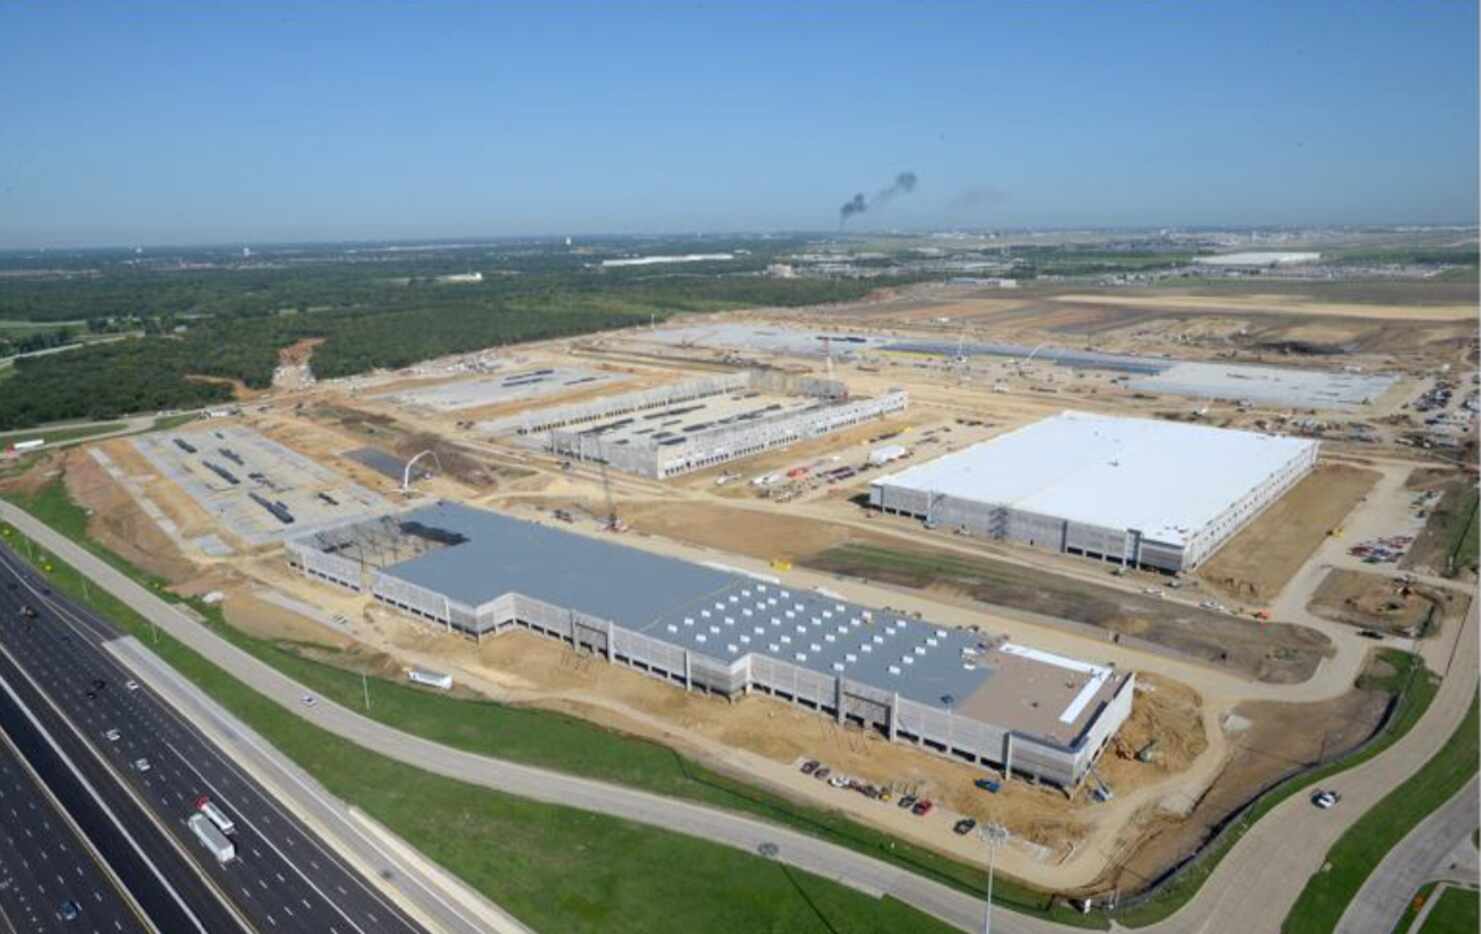 Almost 7 million square feet of warehouse space is coming at the south end of DFW Airport.